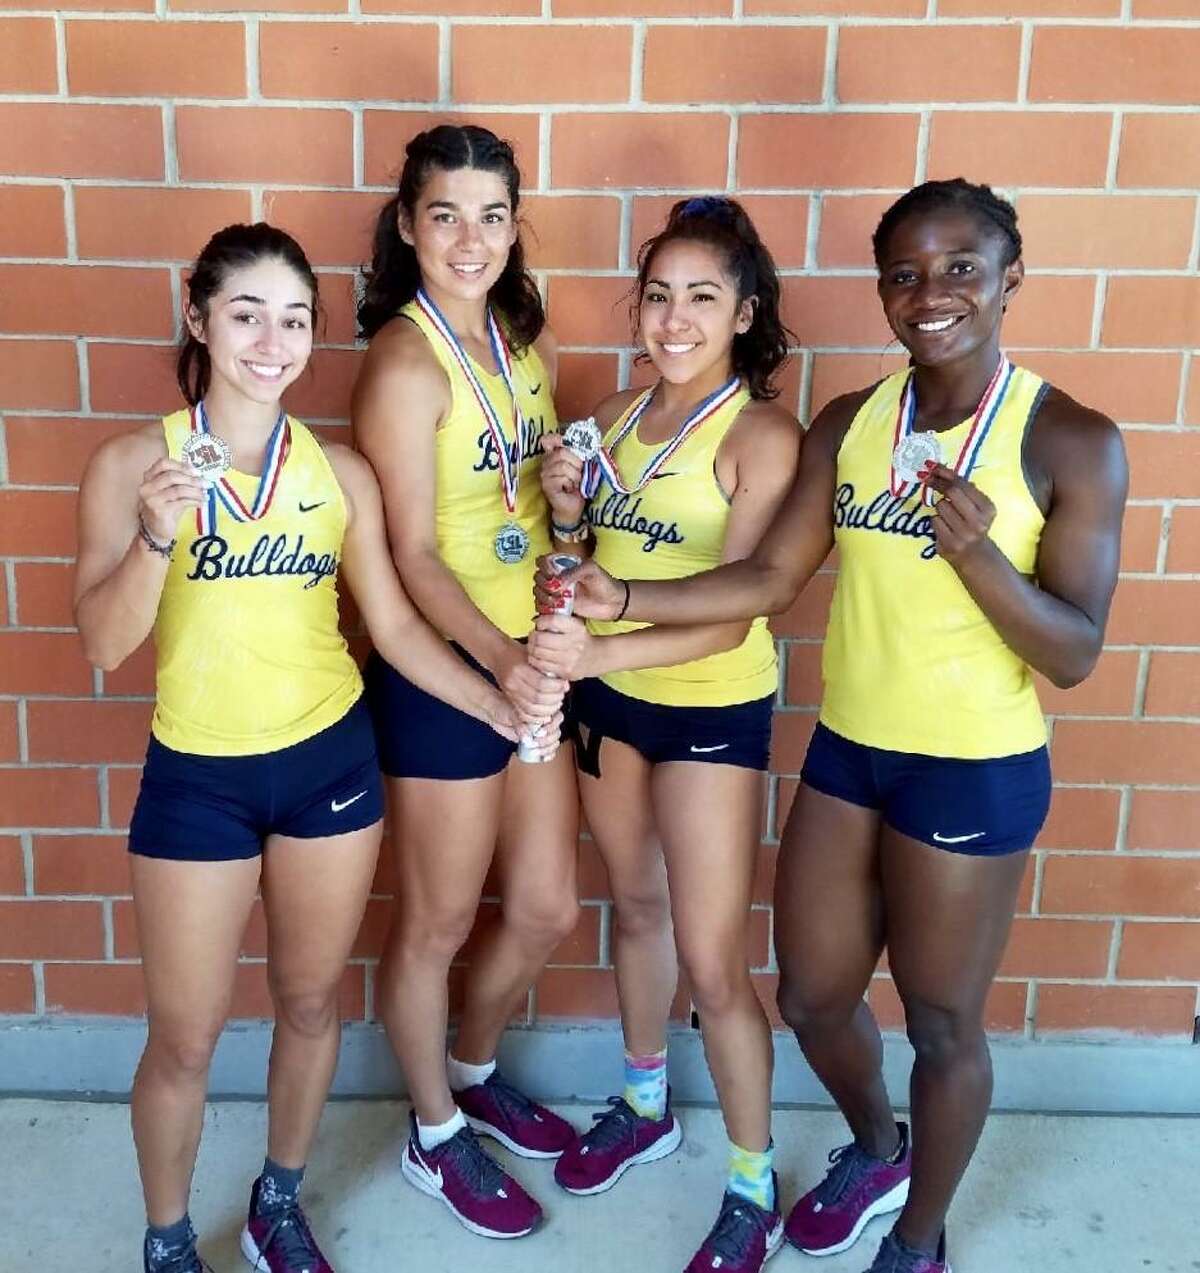 The Alexander girls' 4x100-meter relay team of Avery Puig, Aly Benavides, Krysta Villarreal and Cynthia Emeremnu broke its city record to place second at regionals Saturday and advance to the state meet. Emeremnu also broke her record in the 100-meter dash to place second and advance.